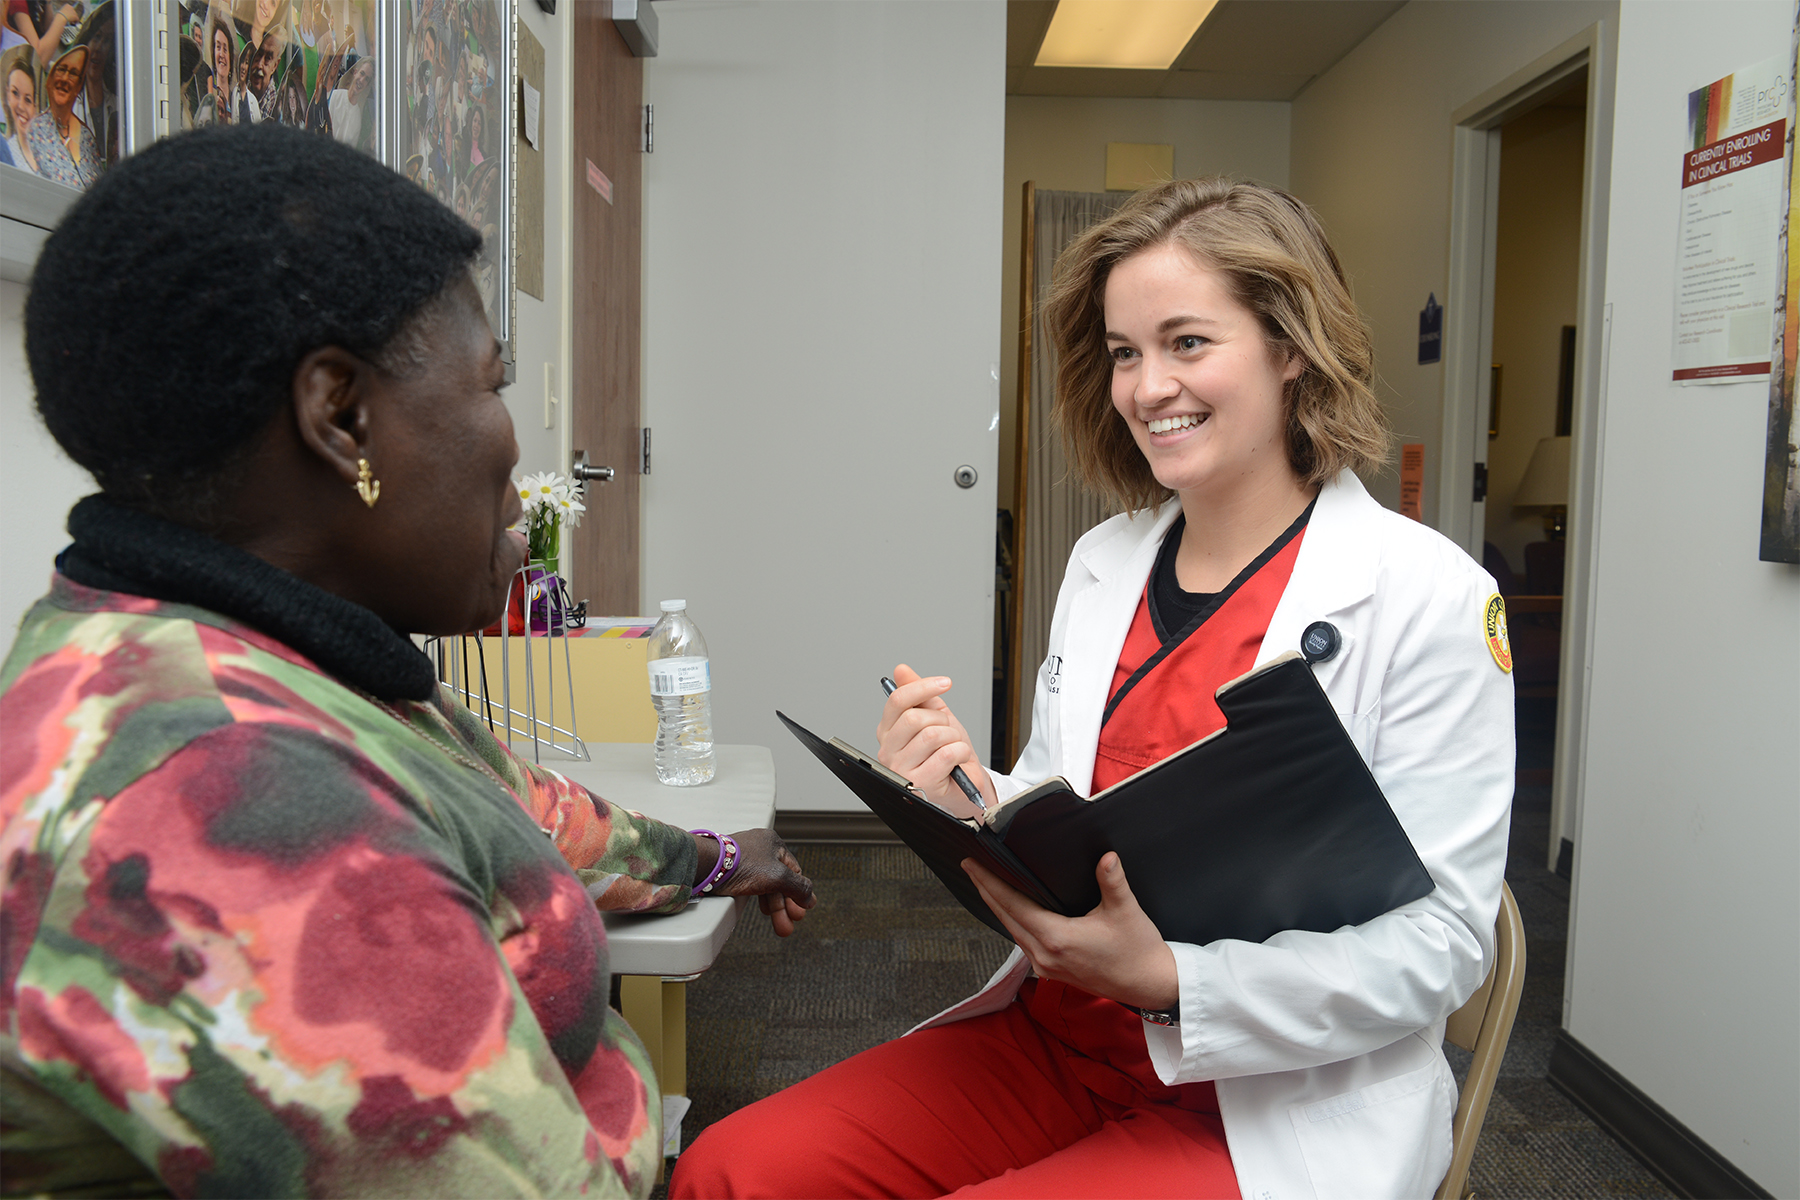 A health care worker in a white coat speaking to another woman